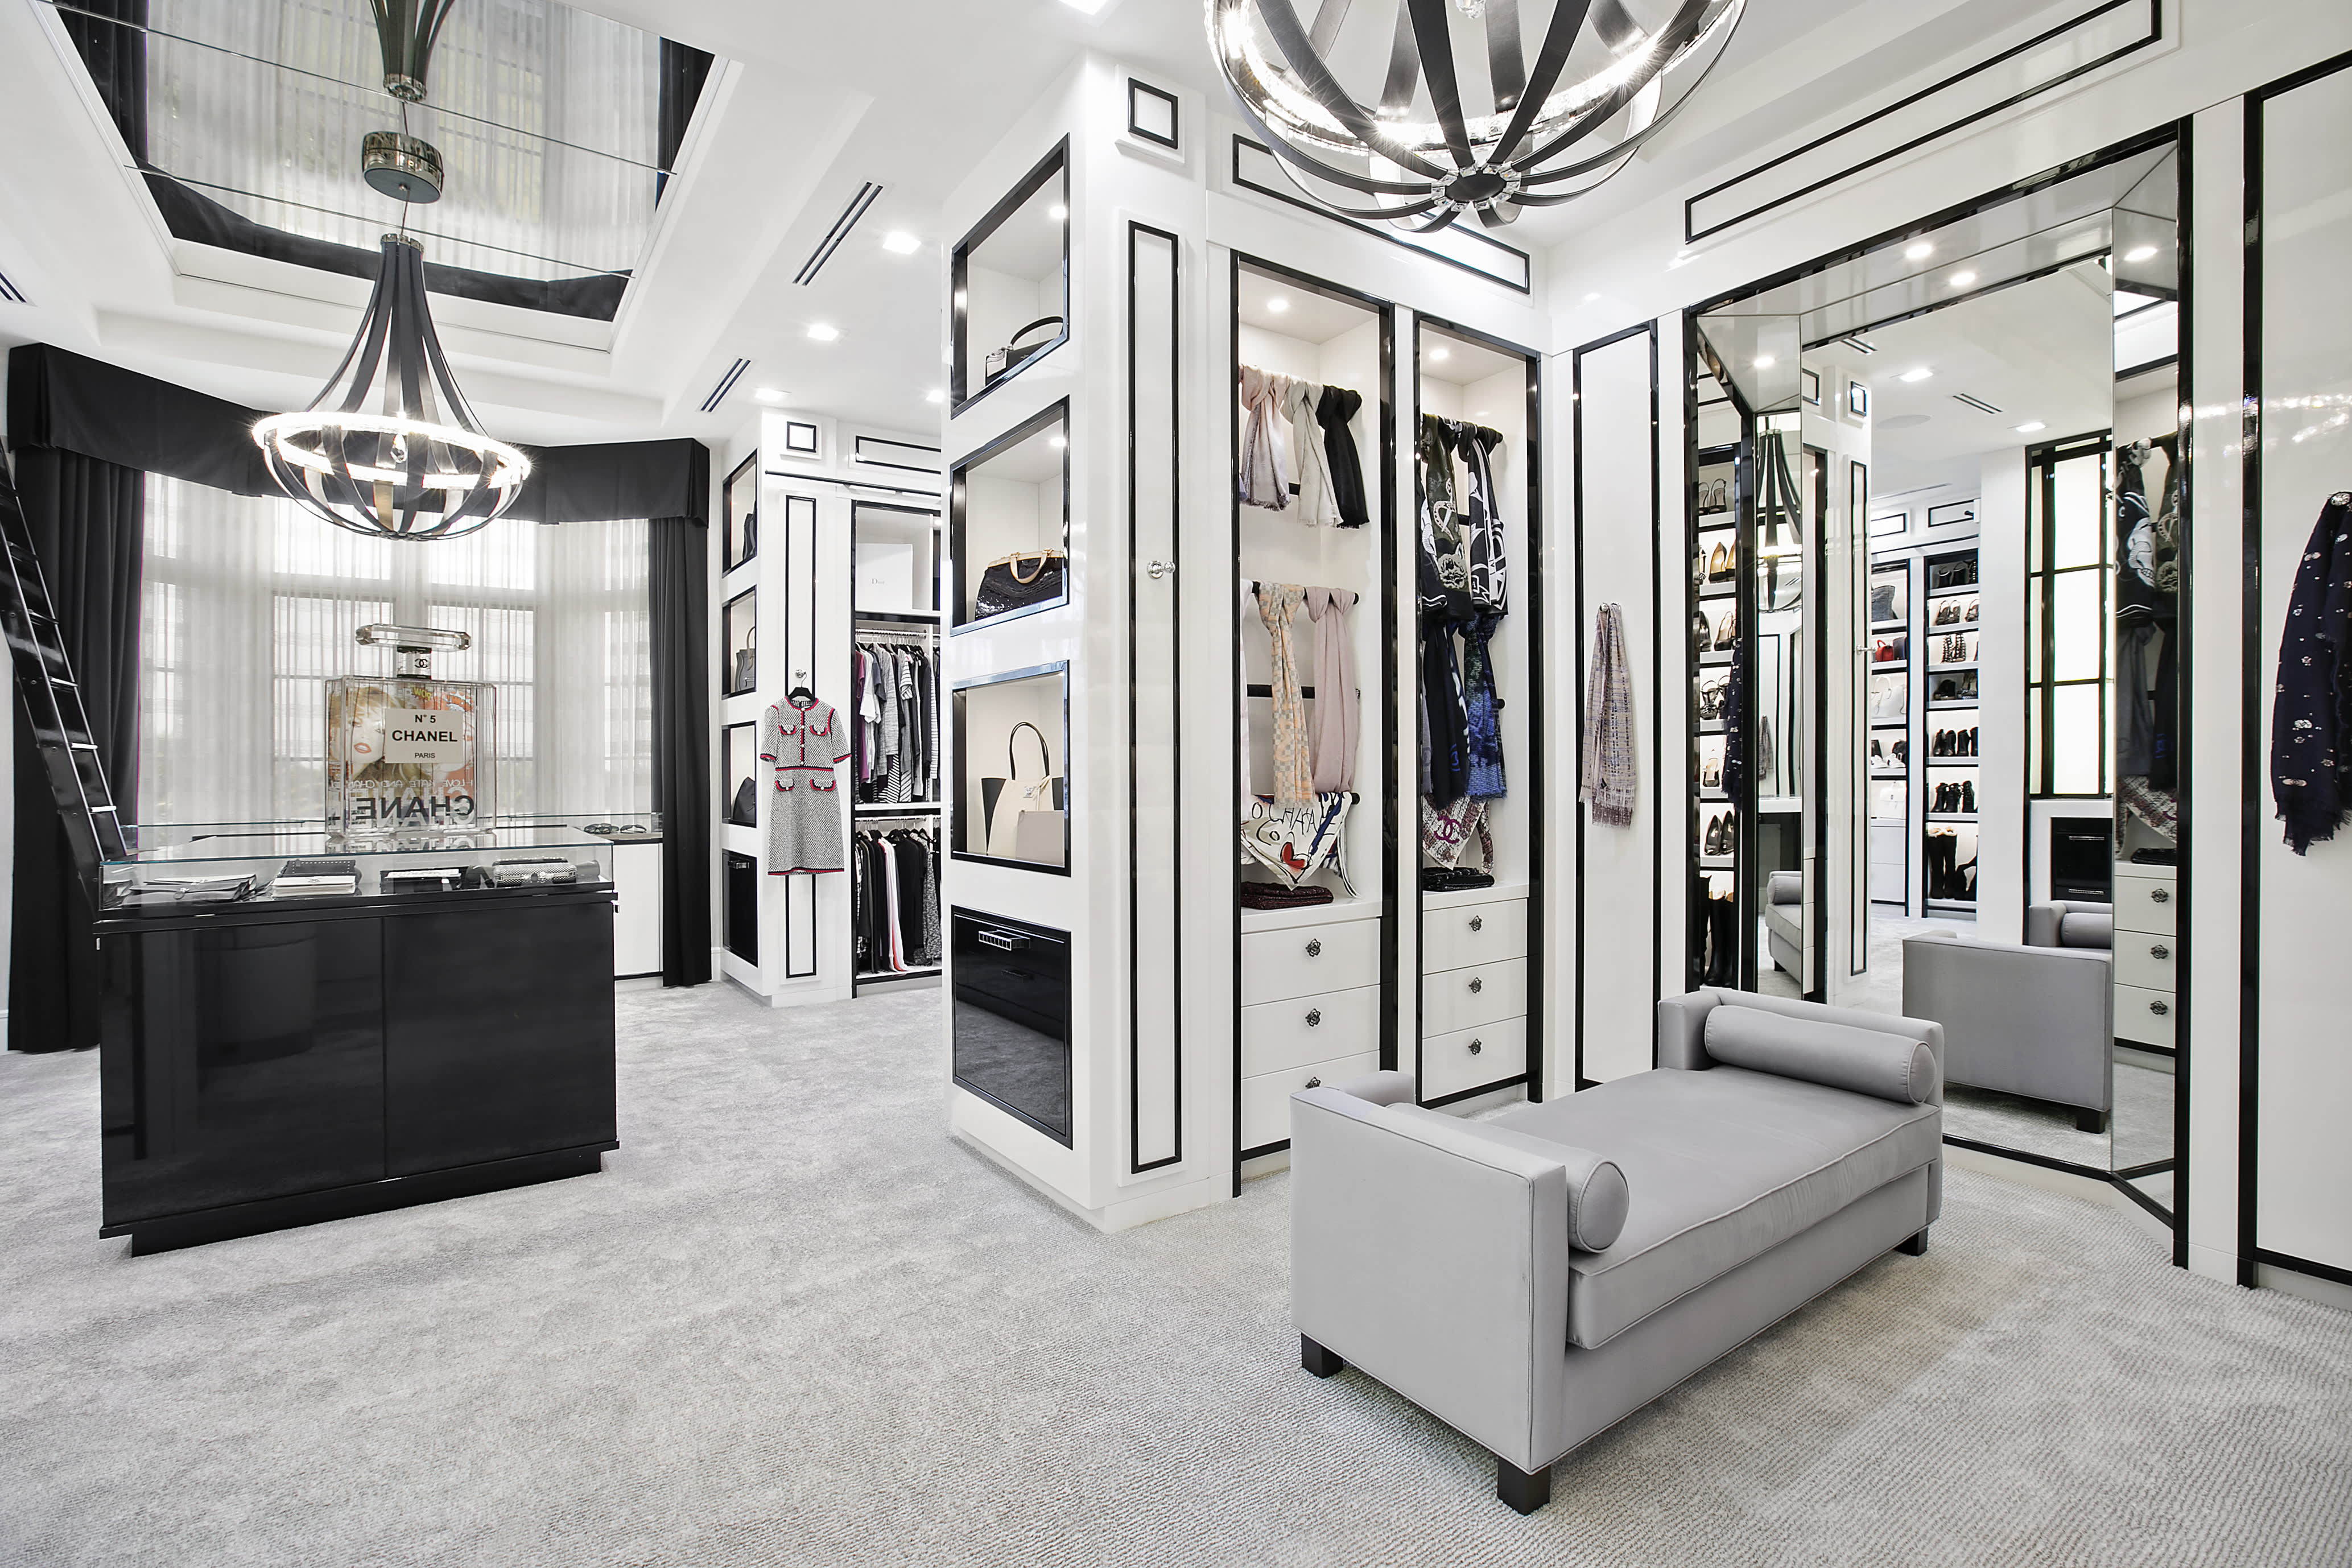 The biggest closet in the world is up for sale! Take a peek before